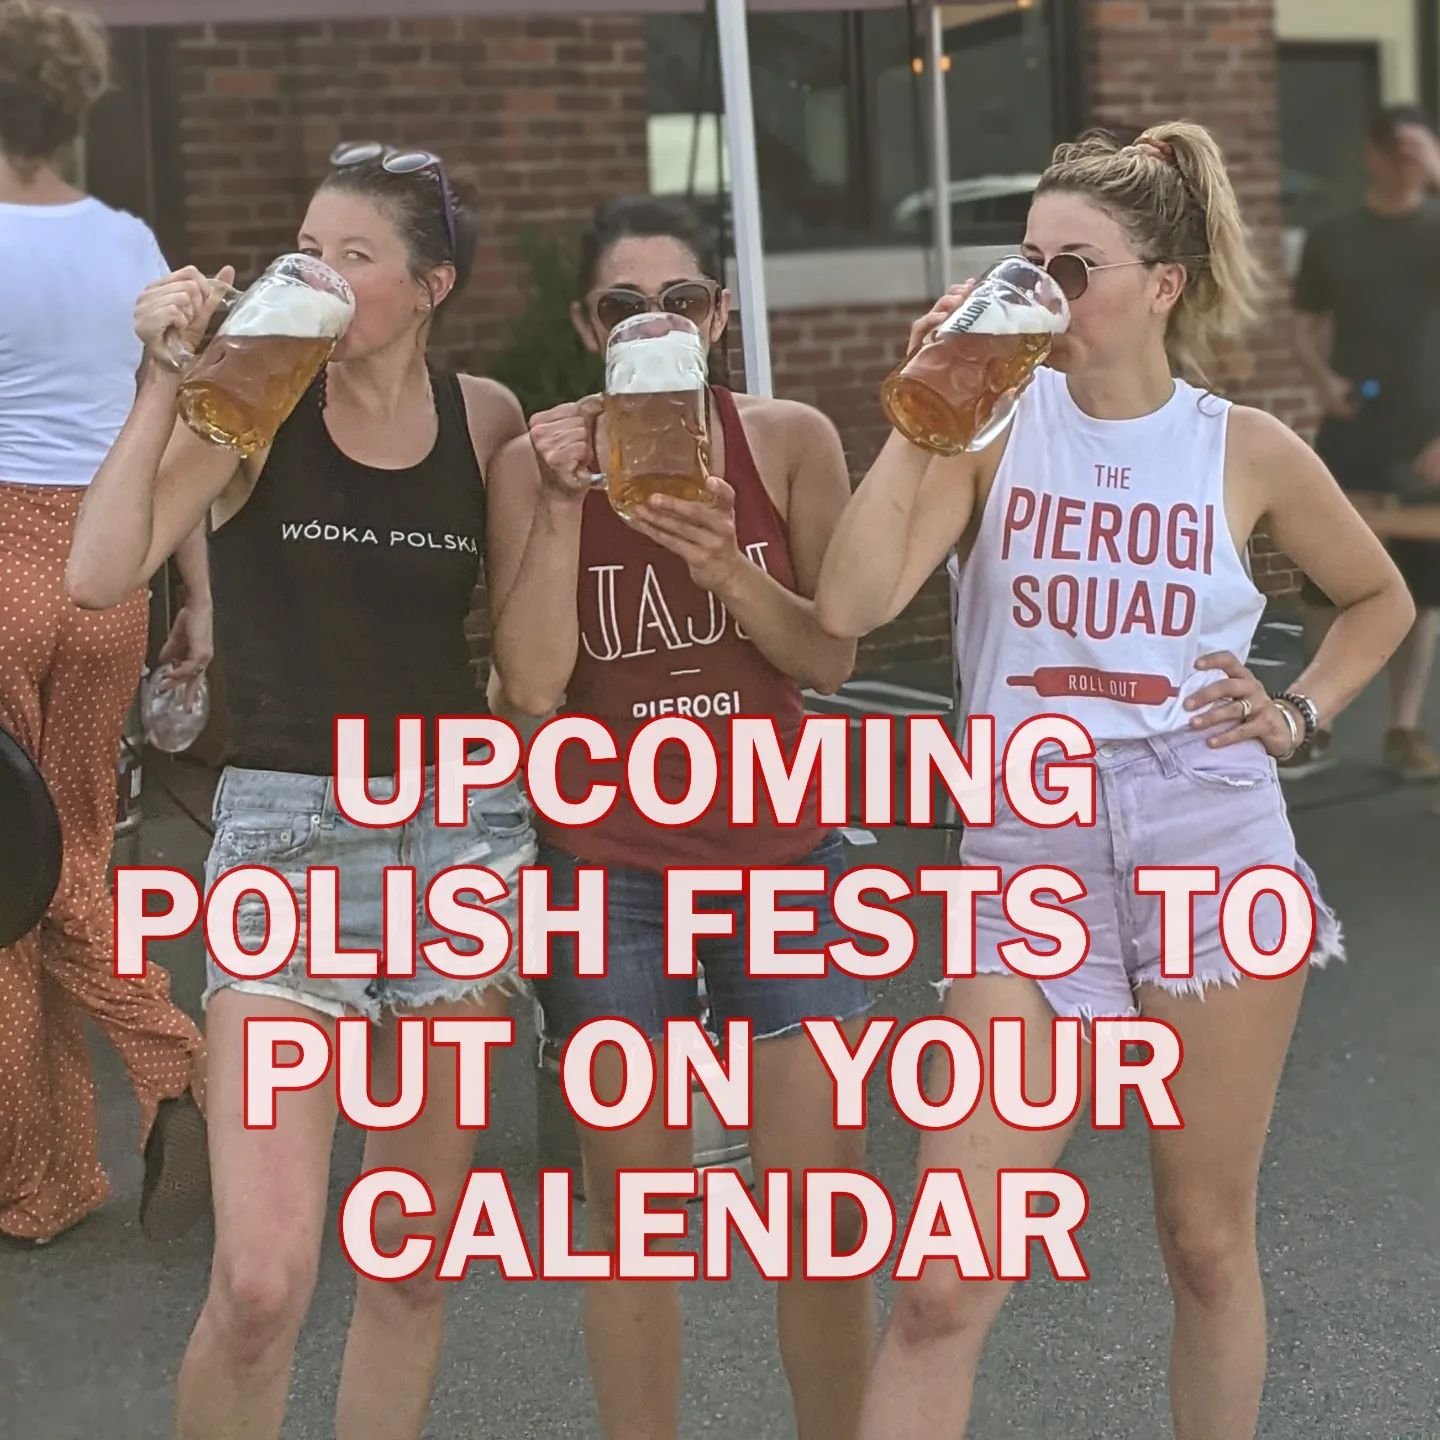 TIS THE SEASON 🥟🦅🥟🇵🇱 for polka, pierogi, piwo - and even @djs_market pączki if you're lucky enough to make it to Boston. Here's the lineup of Polish Fests we'll be attending in the coming months 💃🏻